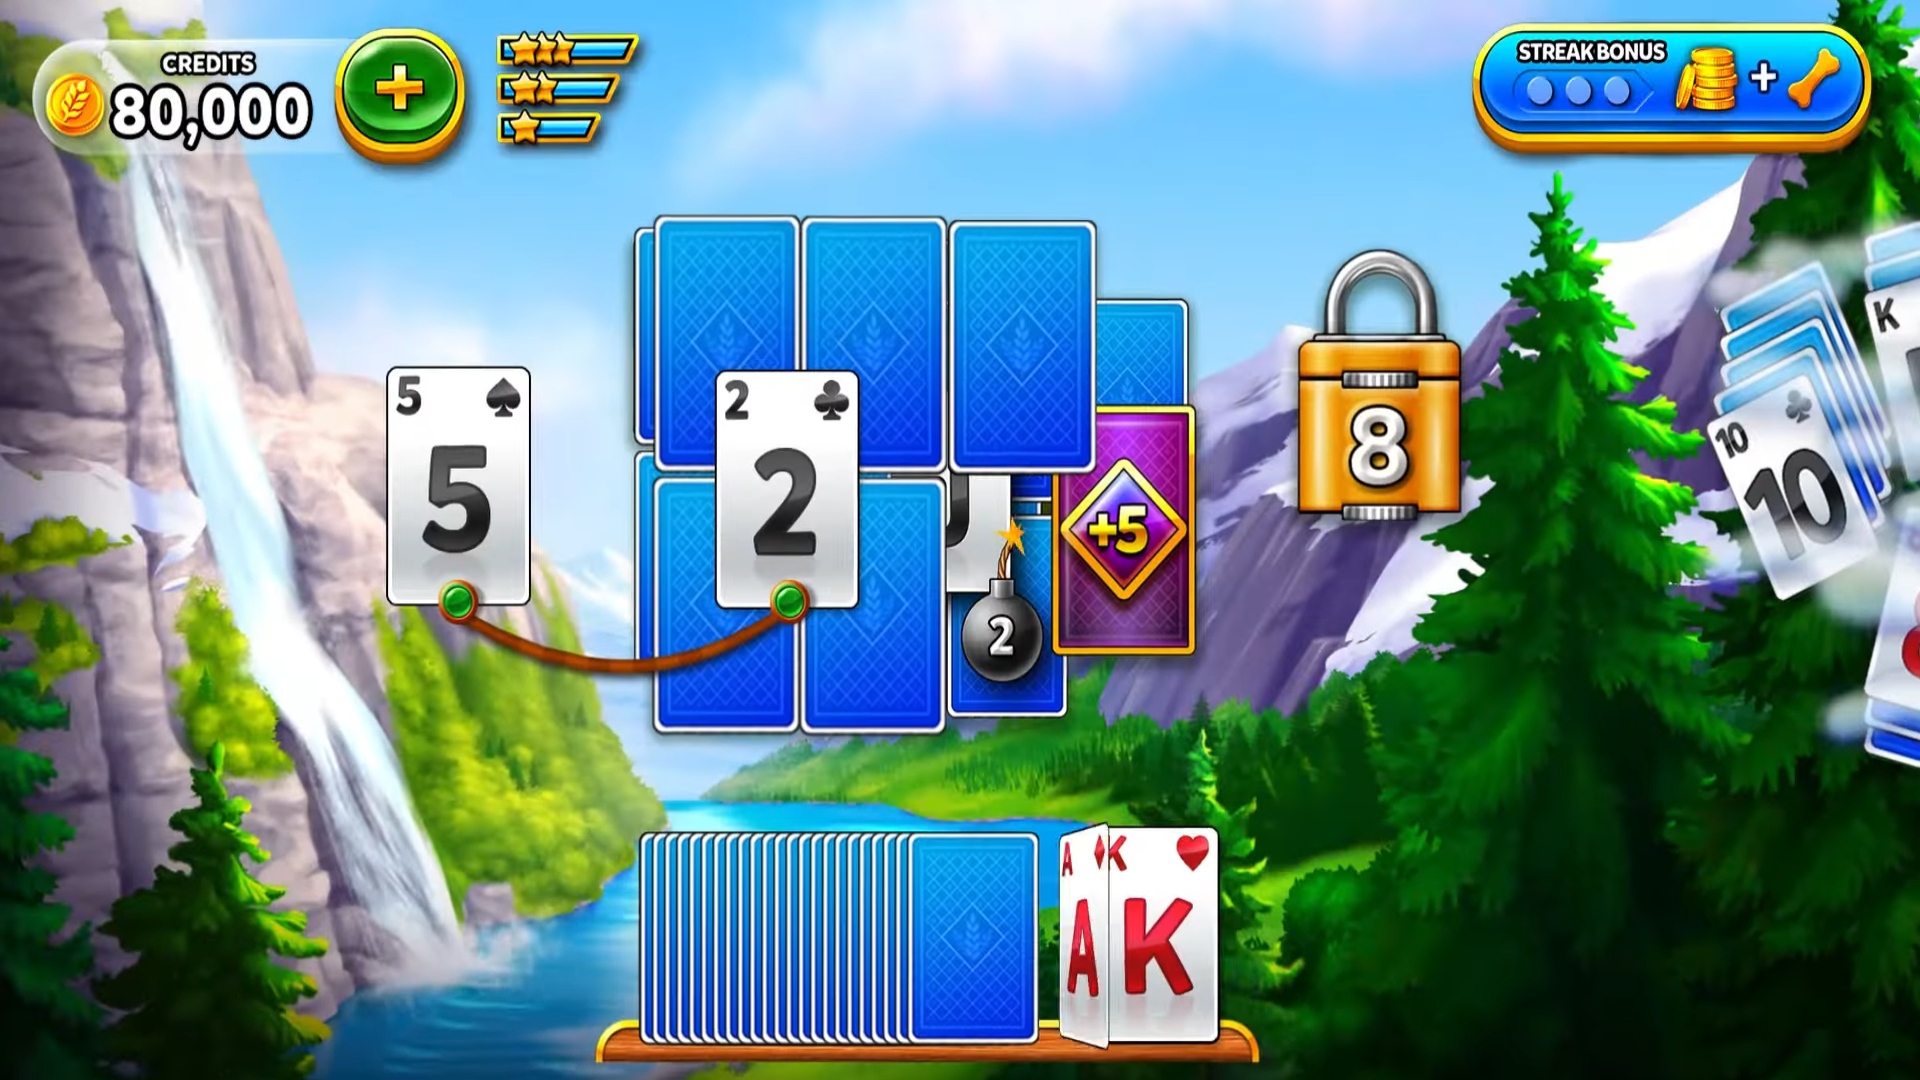 Addictive games: Solitaire Grand Harvest. Image shows a Solitaire game in process.